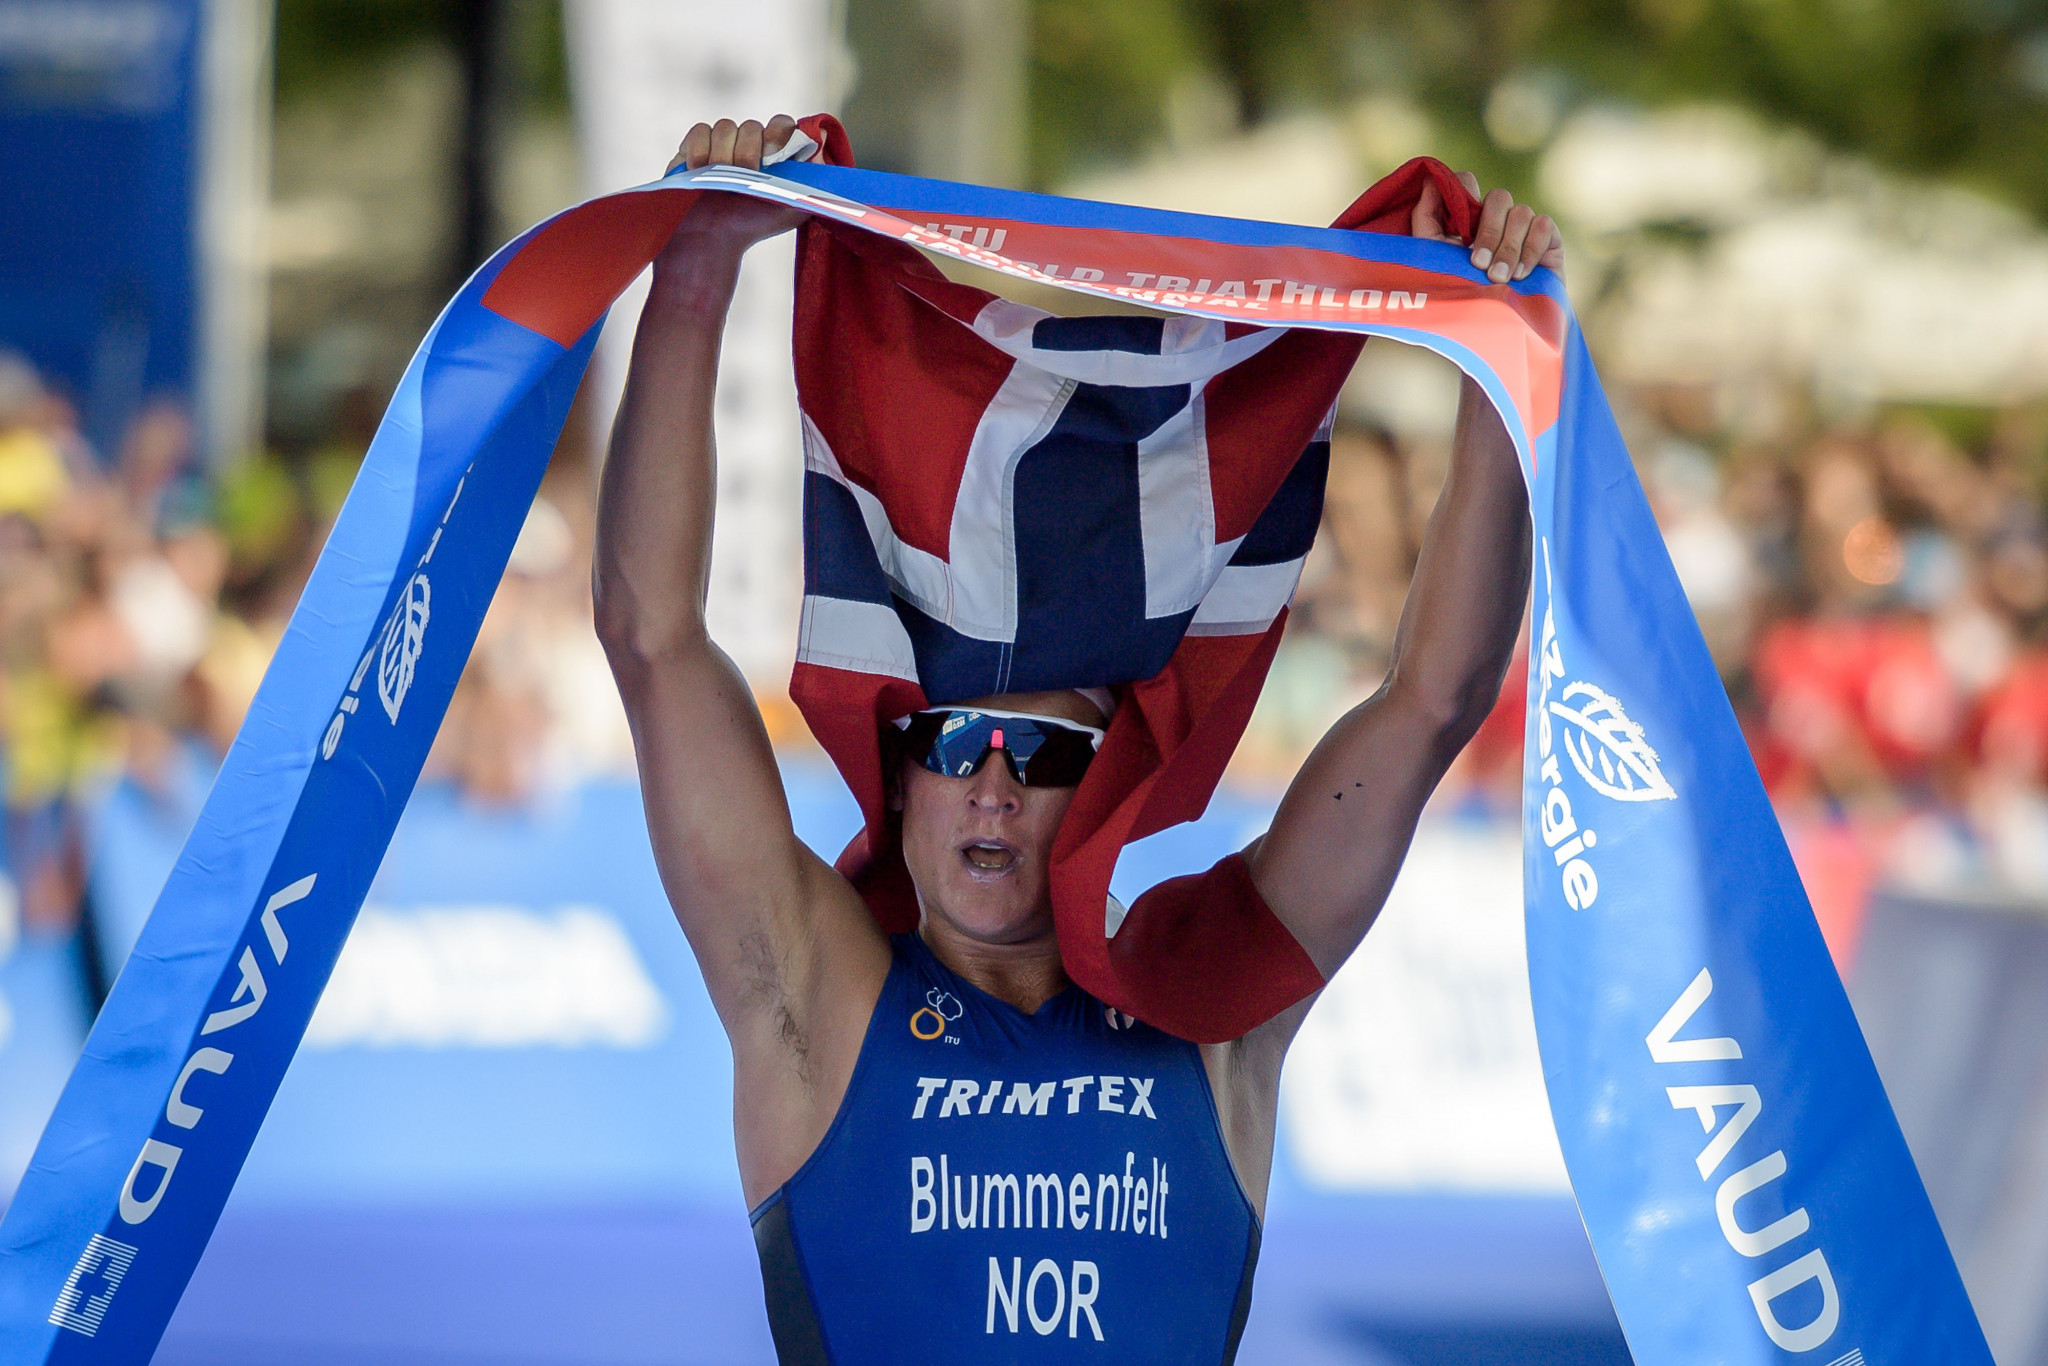 In-form Blummenfelt powers to victory at World Triathlon Cup in Lisbon